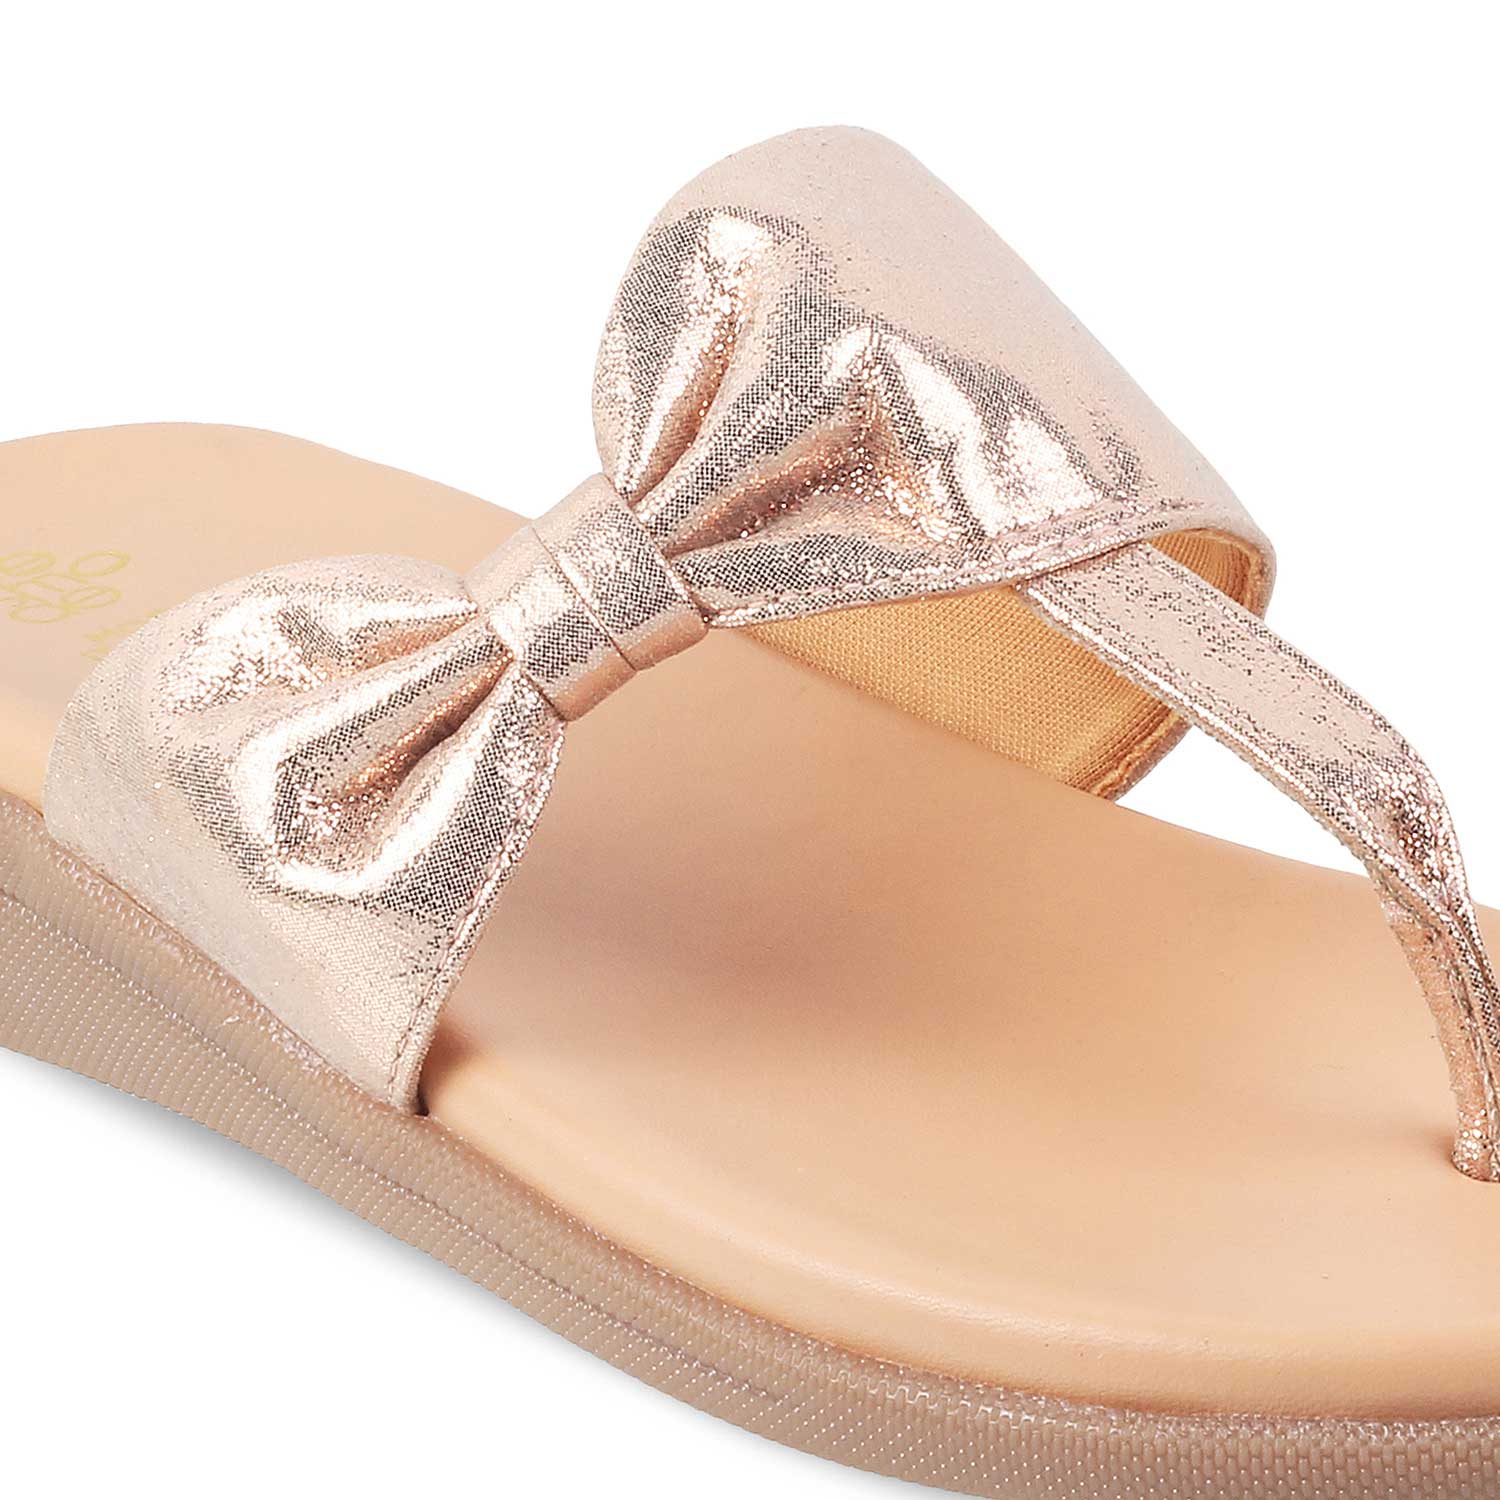 Bow 2 Champagne Women's Casual Flats Online at Tresmode